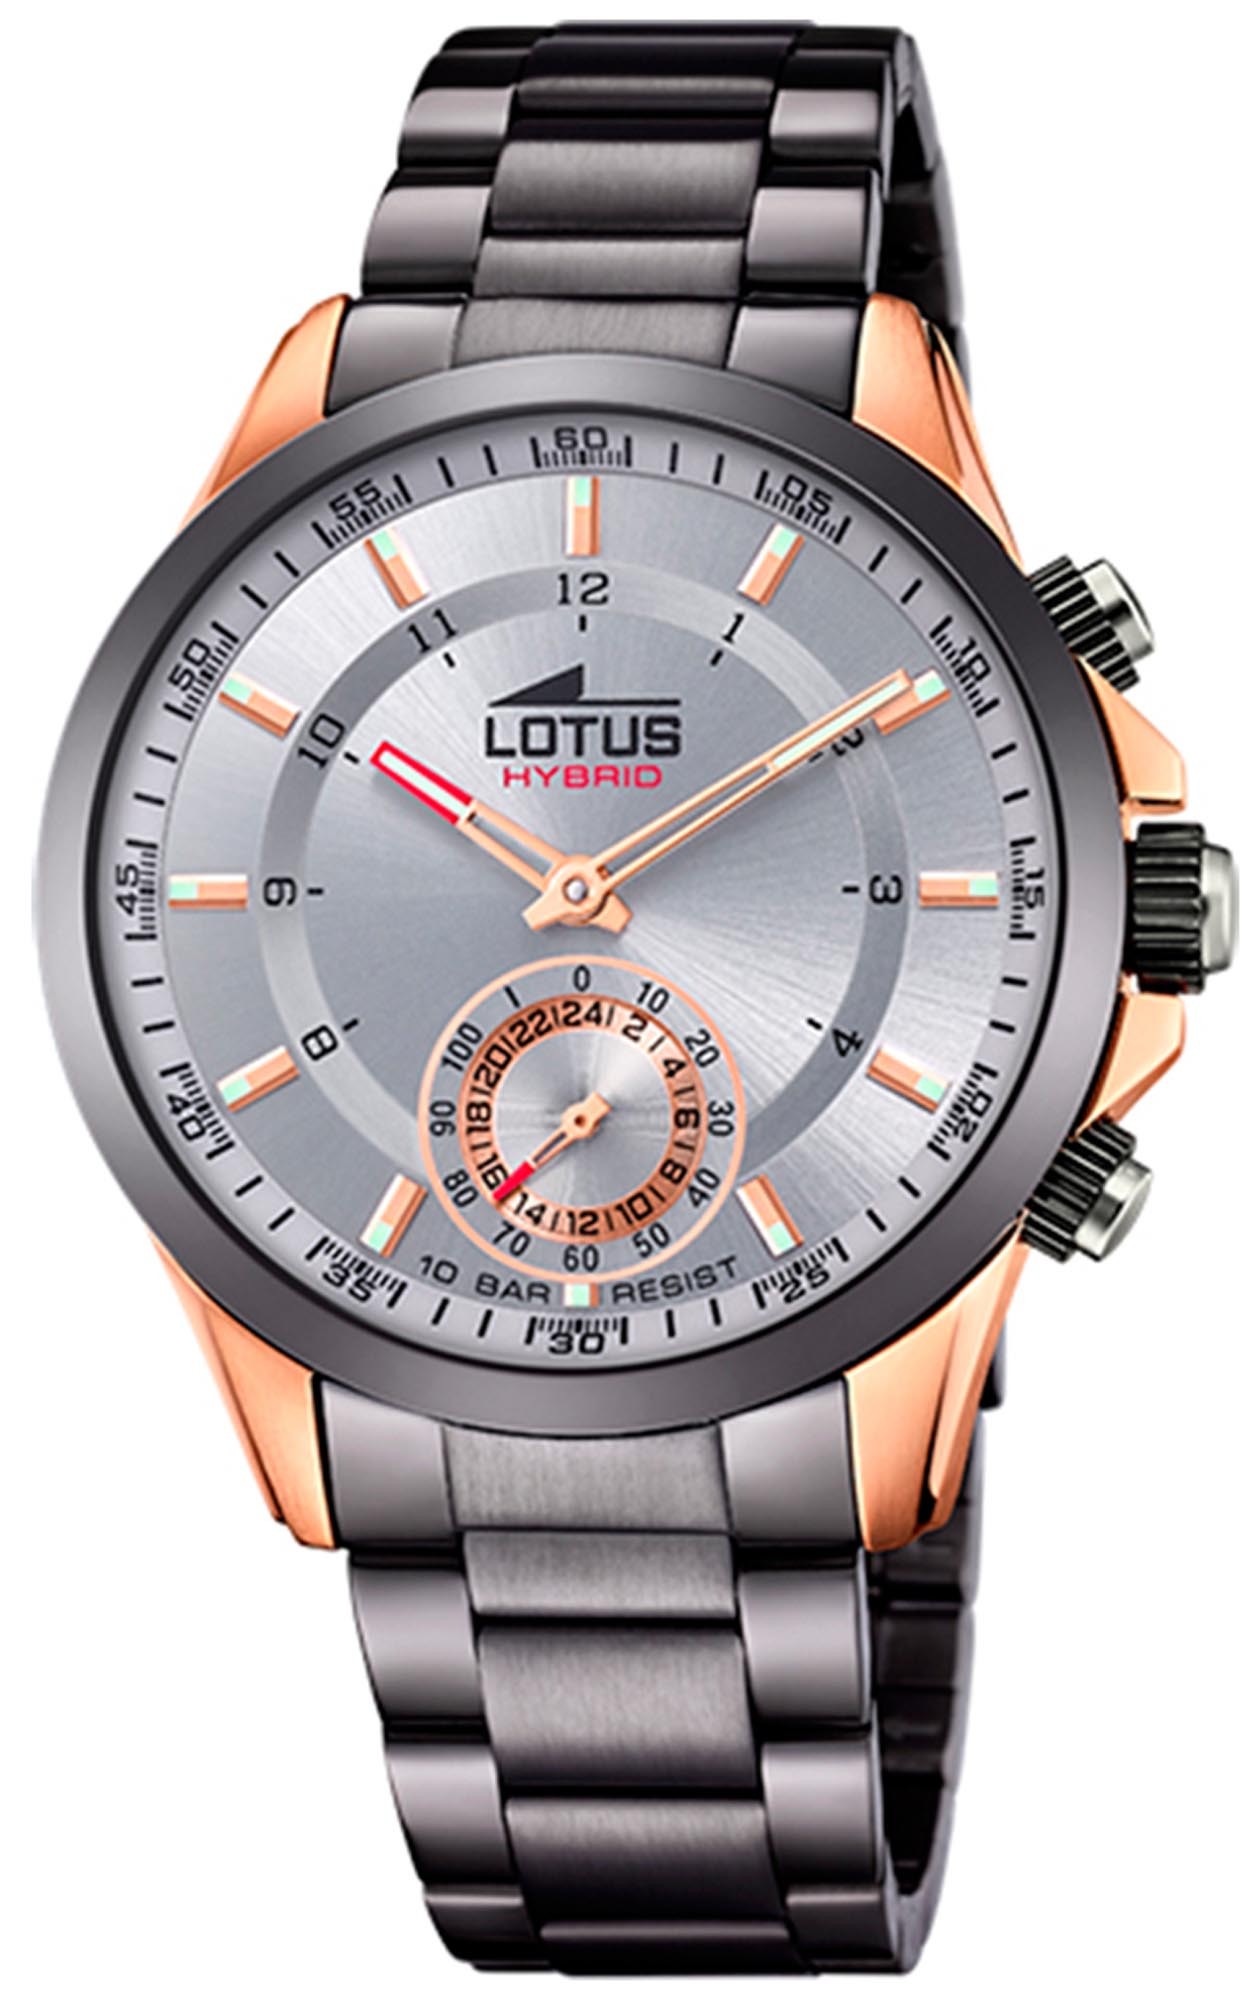 Lotus Men's Watch Lotus Hybrid 18808/1 Watch with Stainless Steel Case  Analog Display Dial and Metal Strap 150828 18808/1 | Comprar Watch Lotus  Hybrid 18808/1 Watch with Stainless Steel Case Analog Display